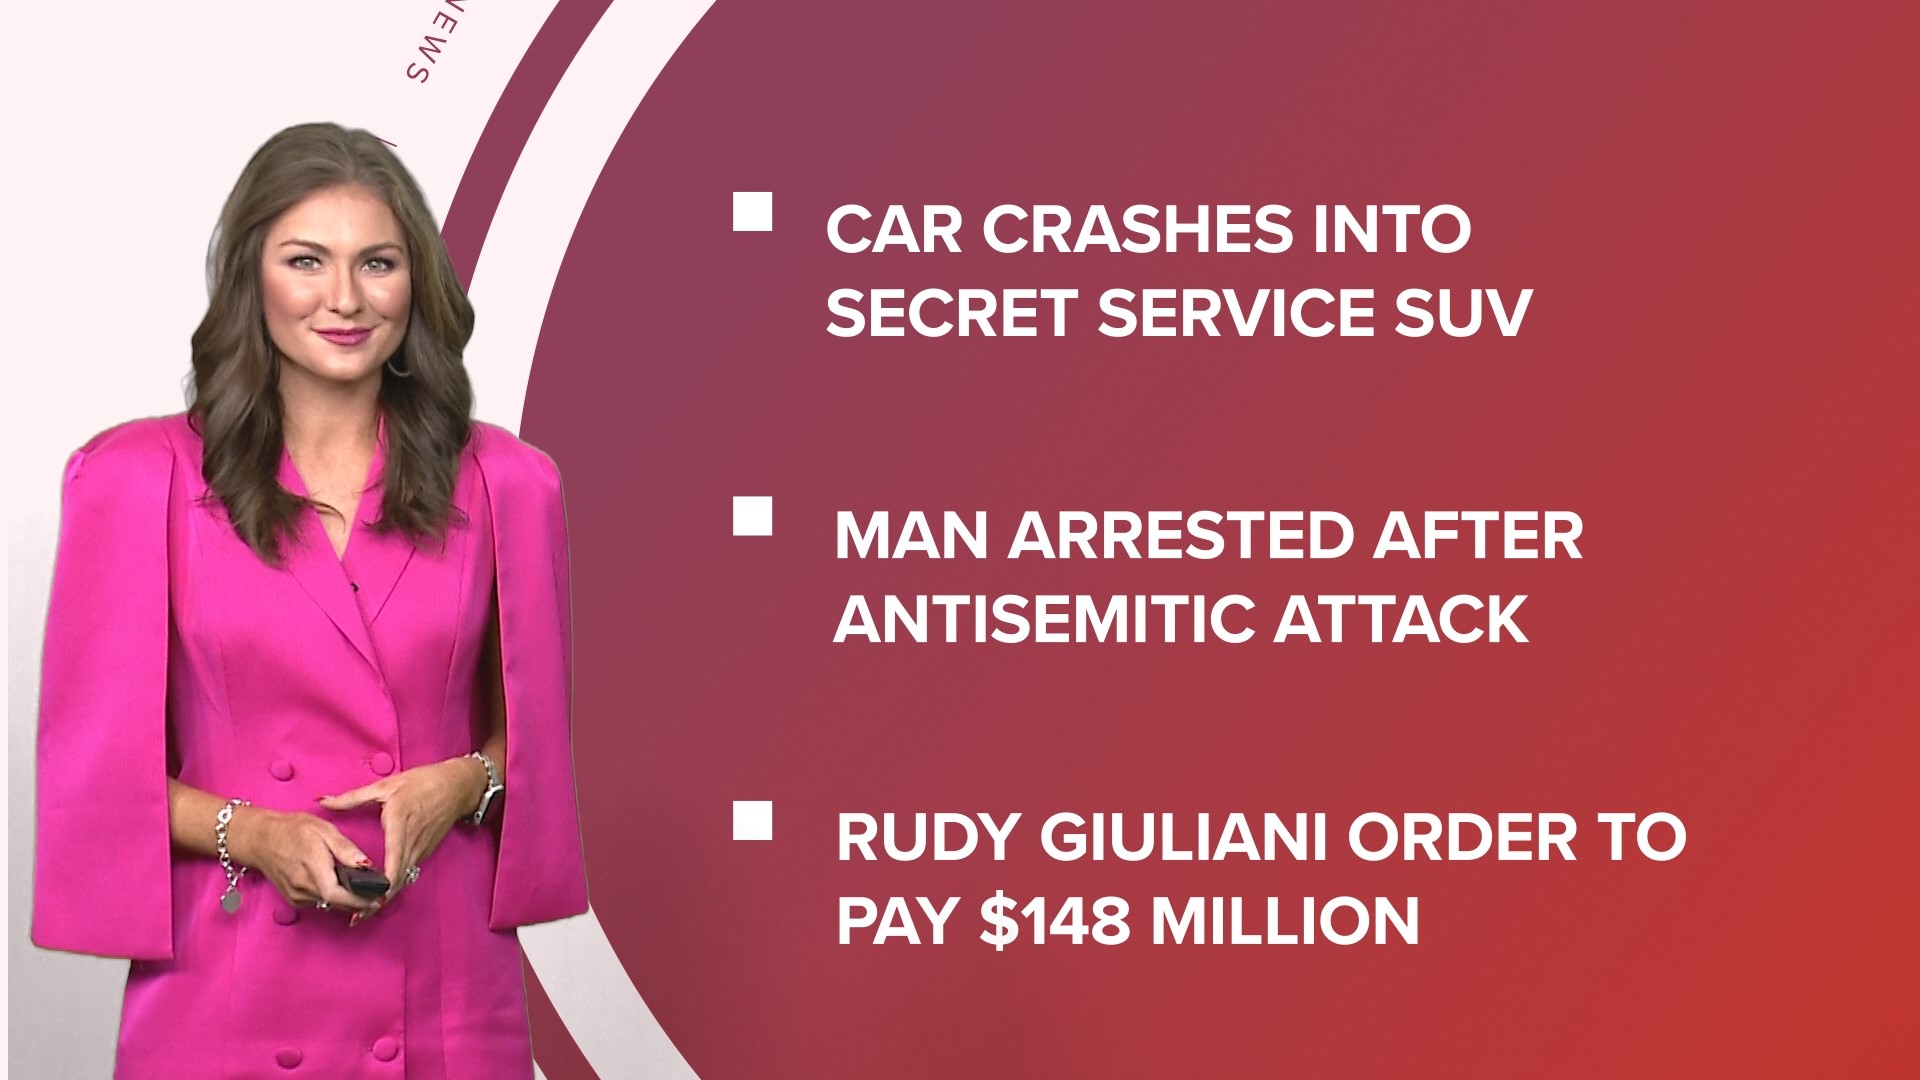 A look at what is happening in the news from Rudy Giuliani ordered to pay $148M to a Quaker Oats recall and a Christmas lights display raising awareness for autism.